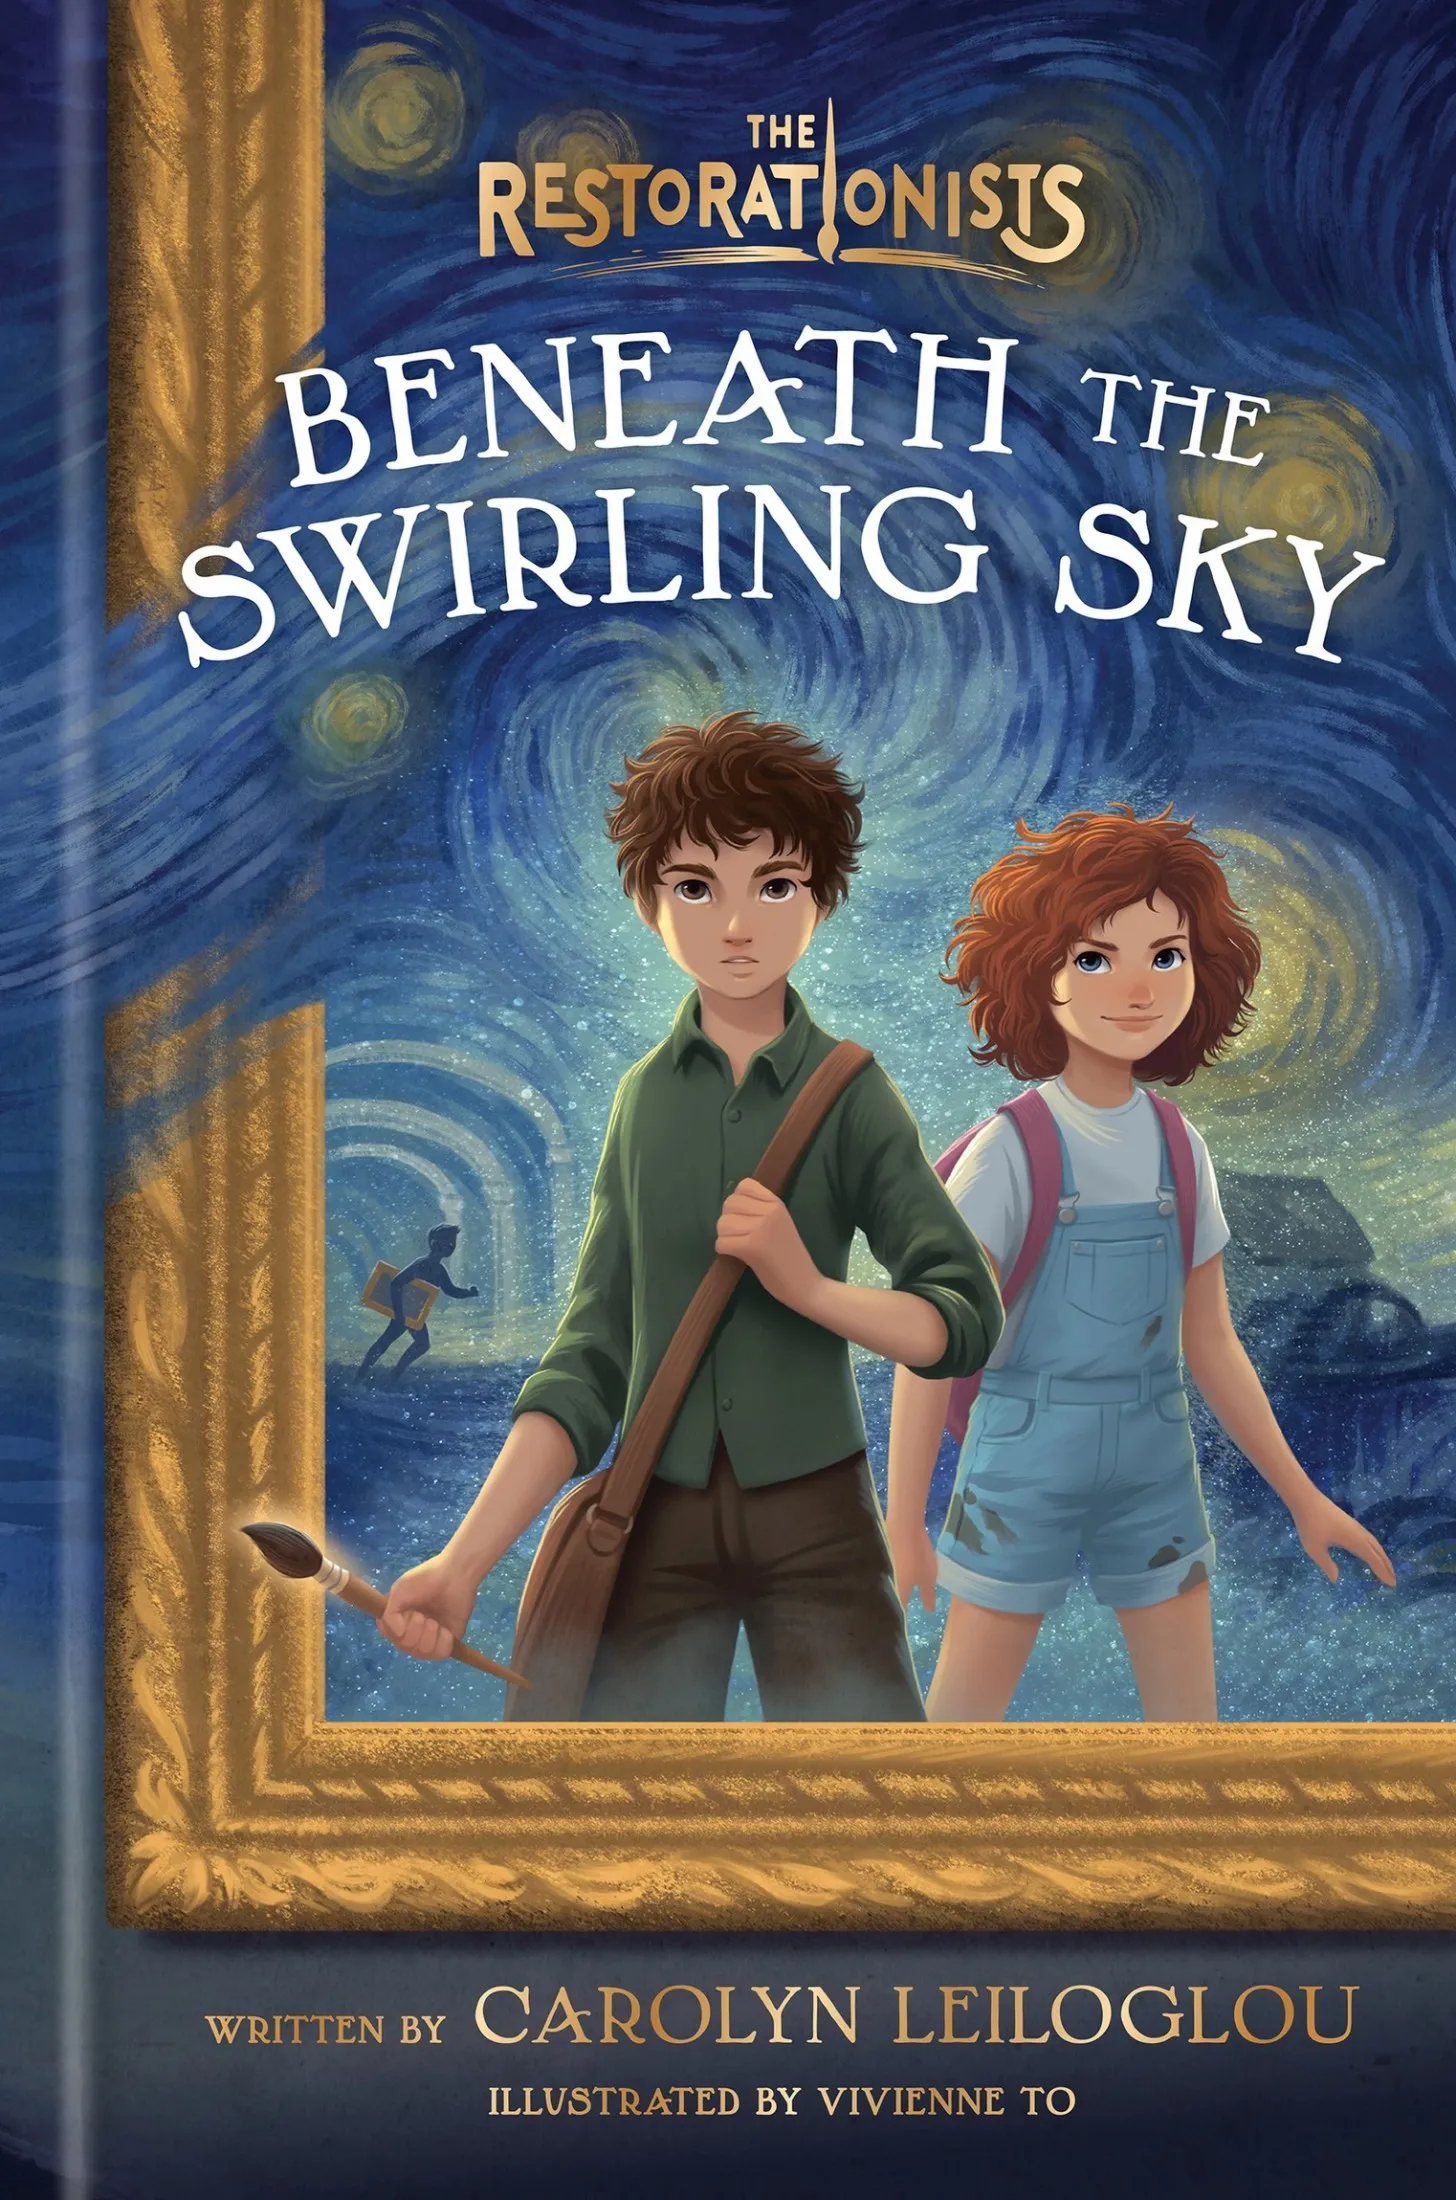 Beneath the Swirling Sky (The Restorationists #1)